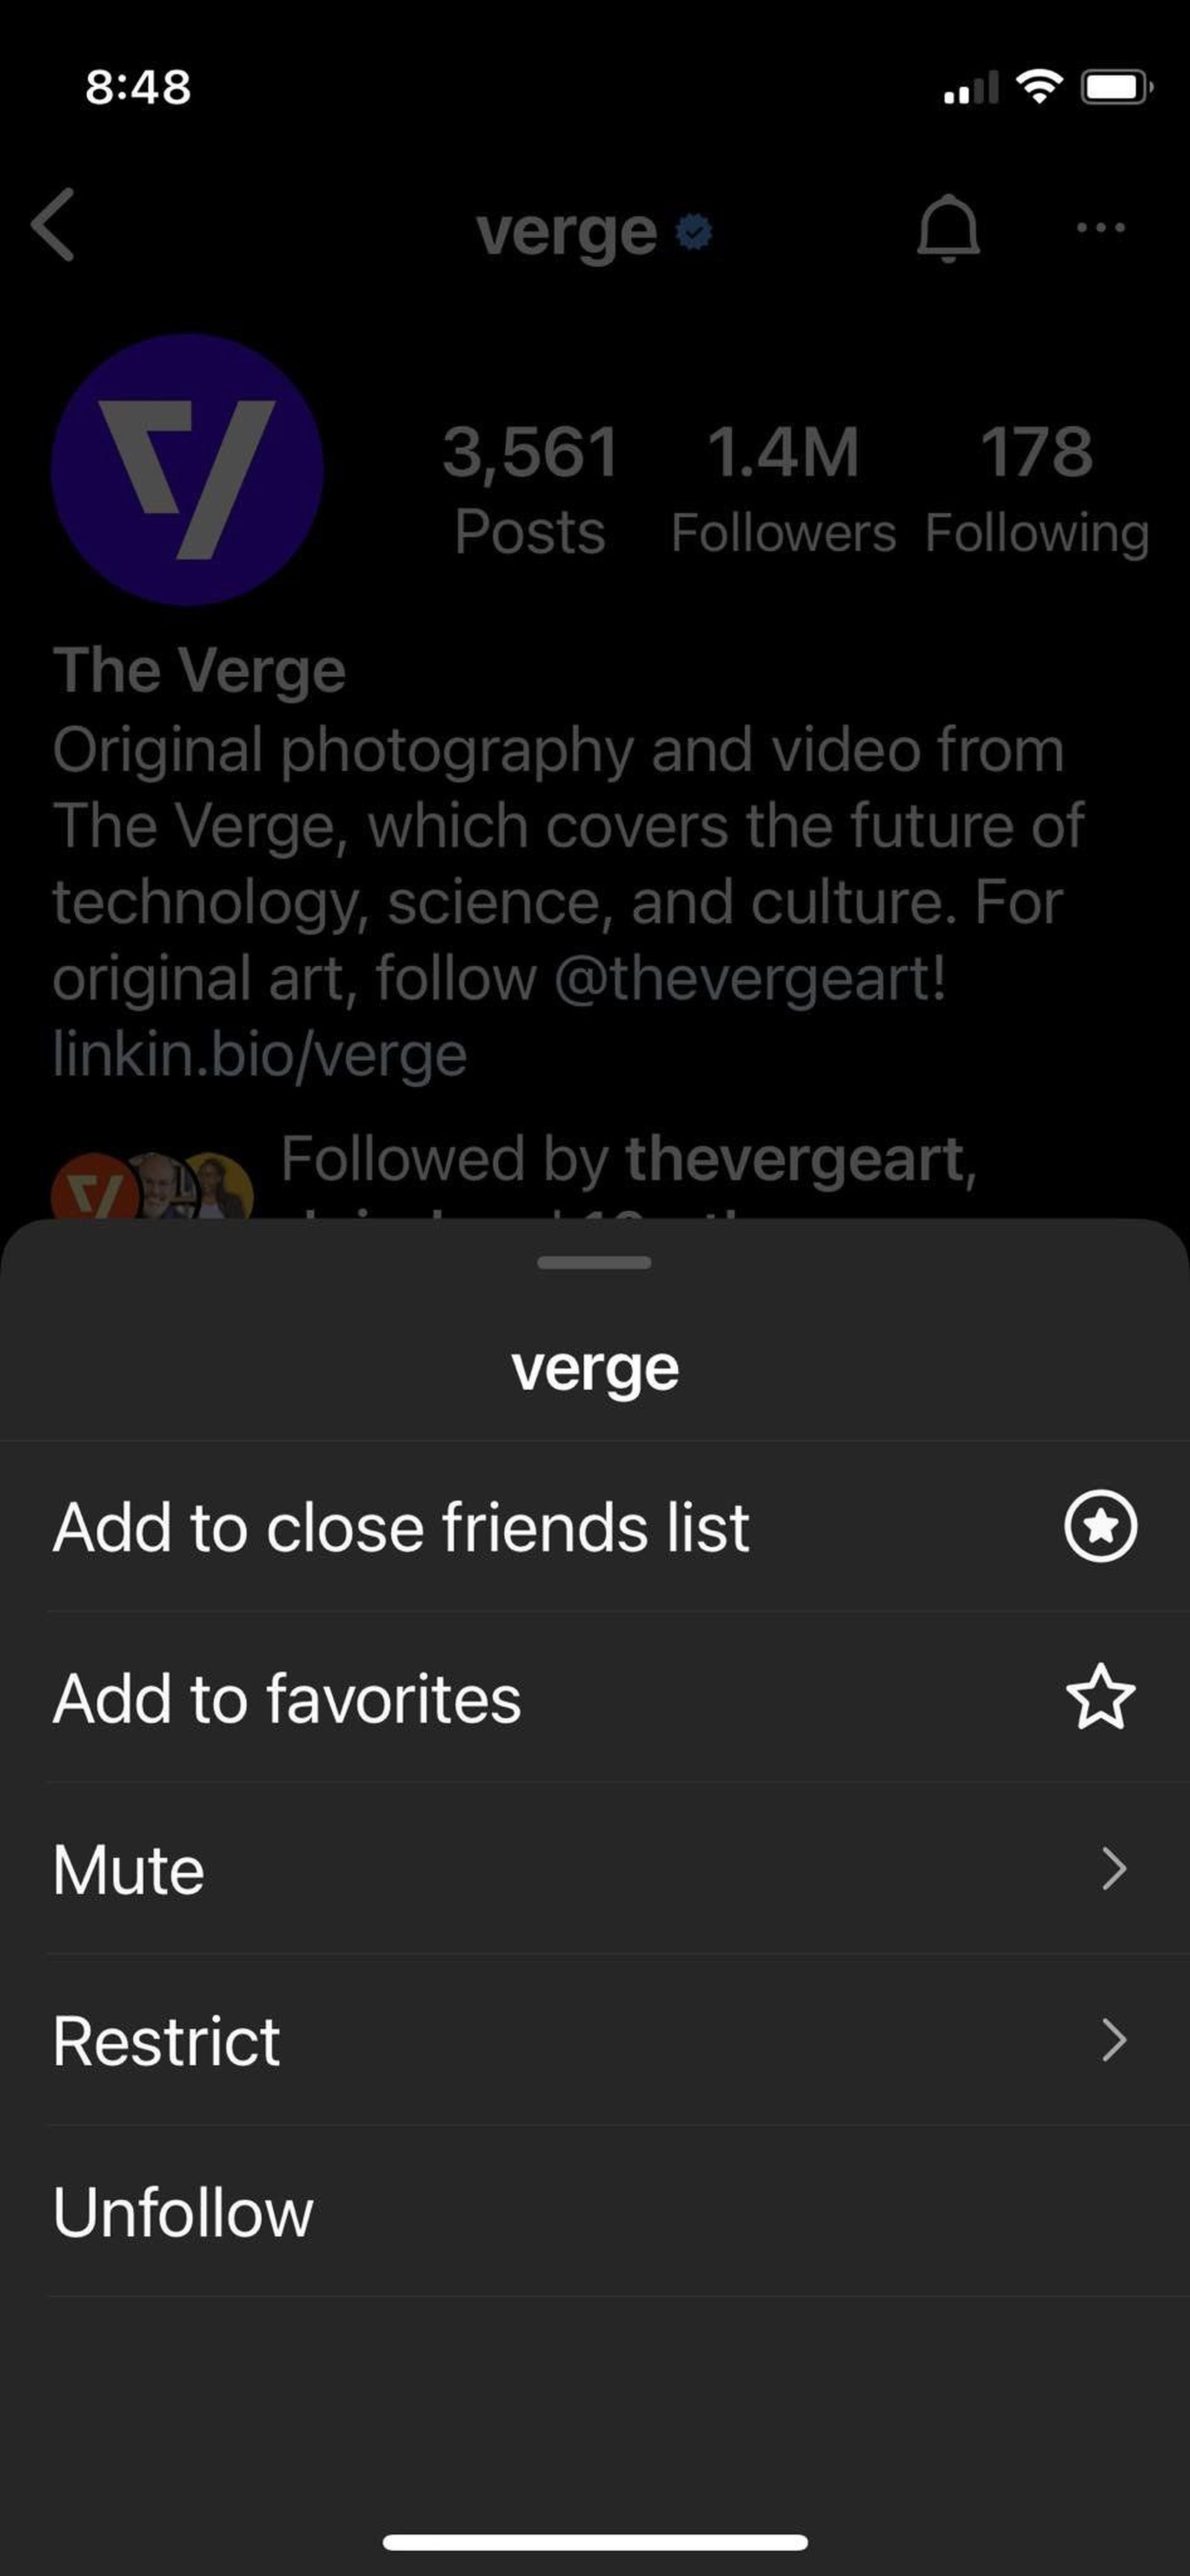 Phone screen with pop-up menu at bottom offering options to mute, restrict or unfollow.